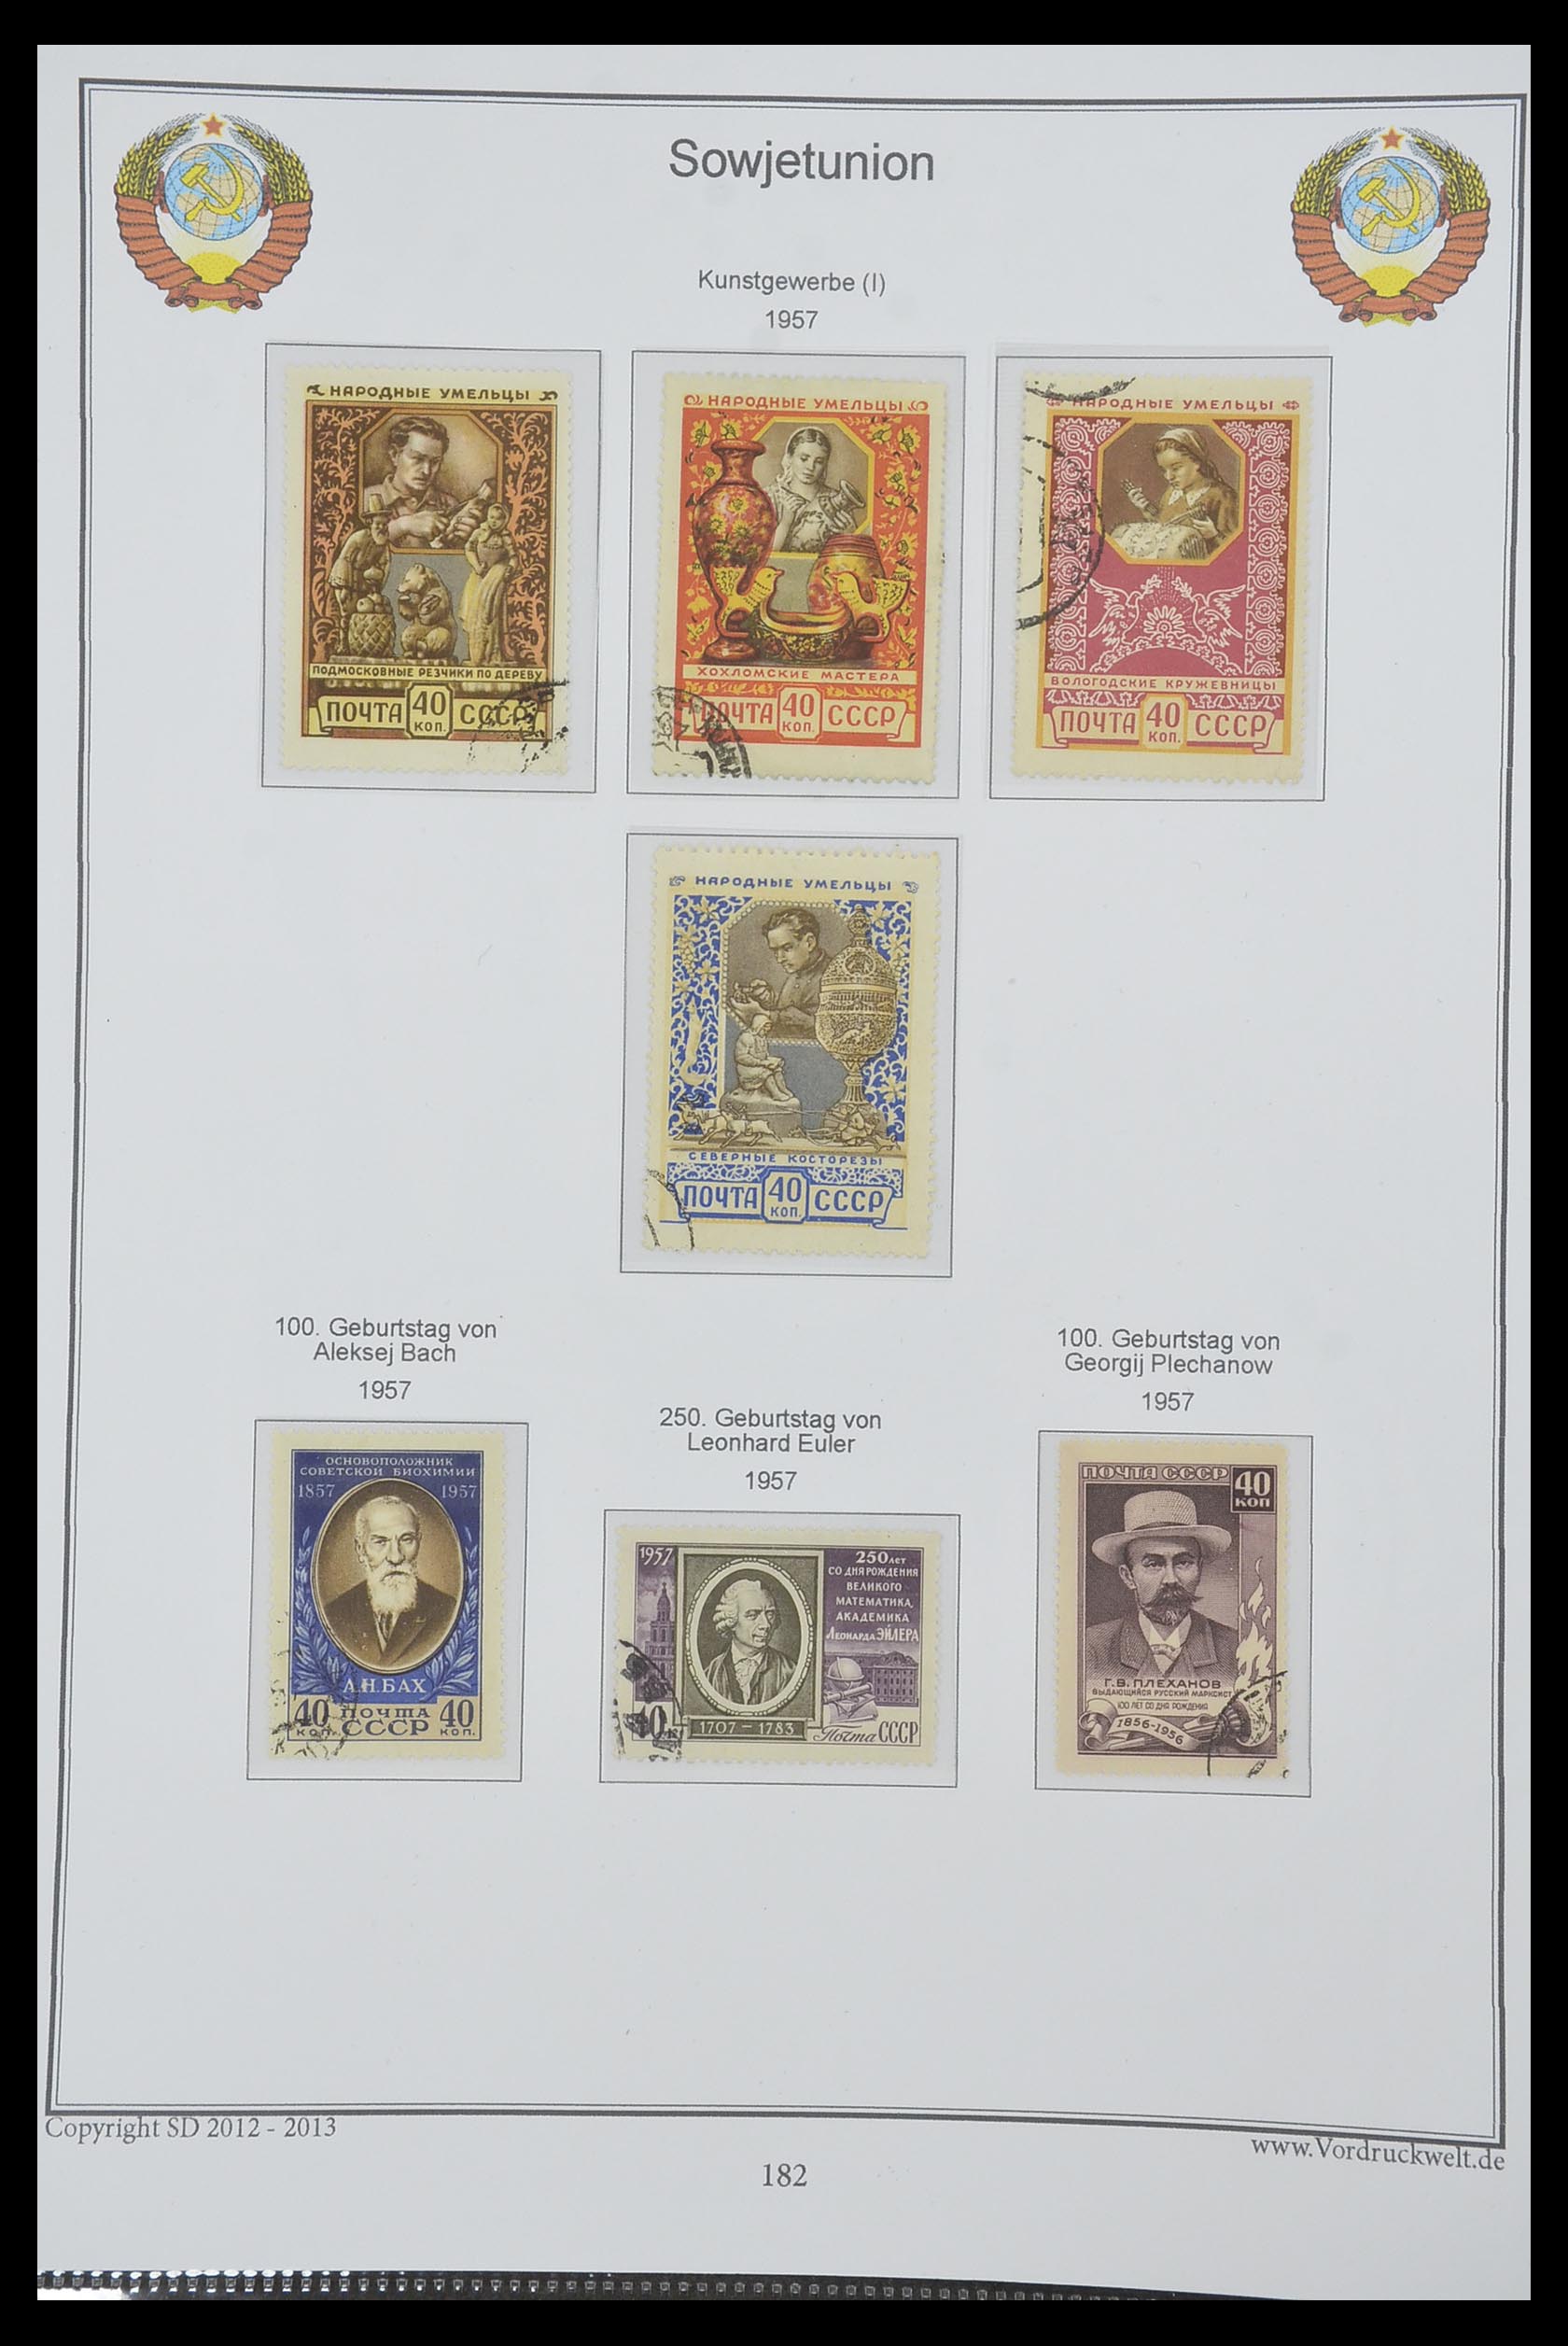 33974 186 - Stamp collection 33974 Russia 1858-1998.